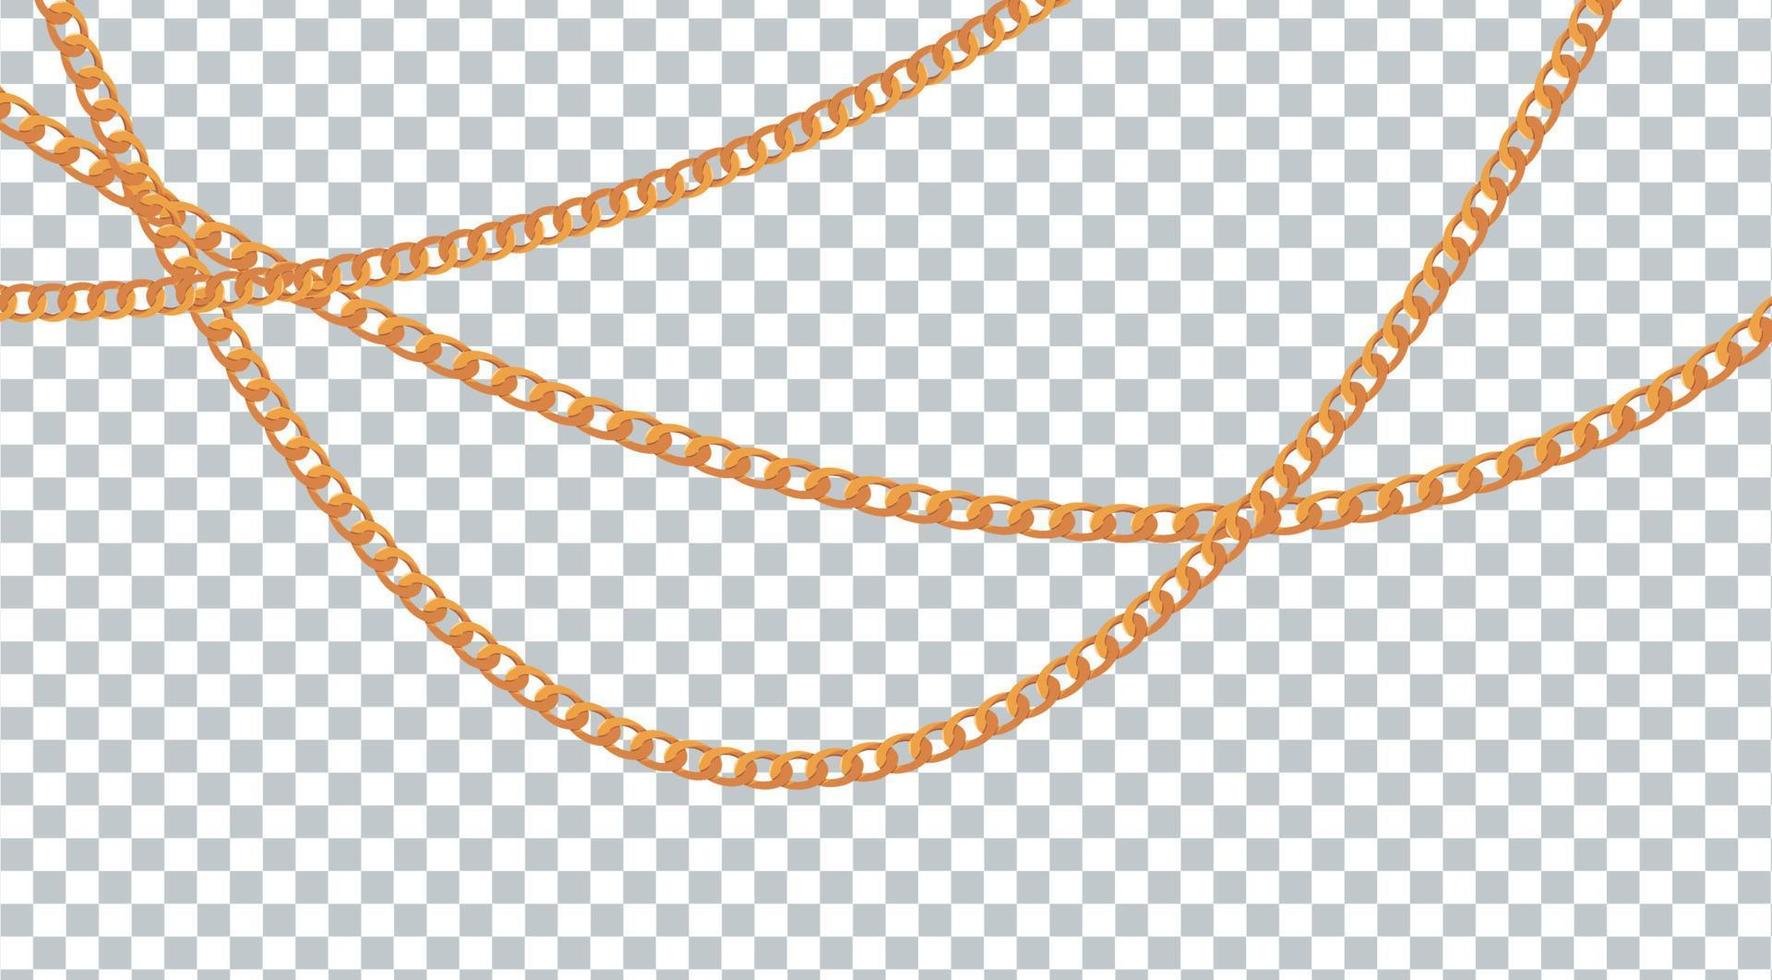 Abstract Golden or Bronze Color Chain Decorative element. Vector illustration